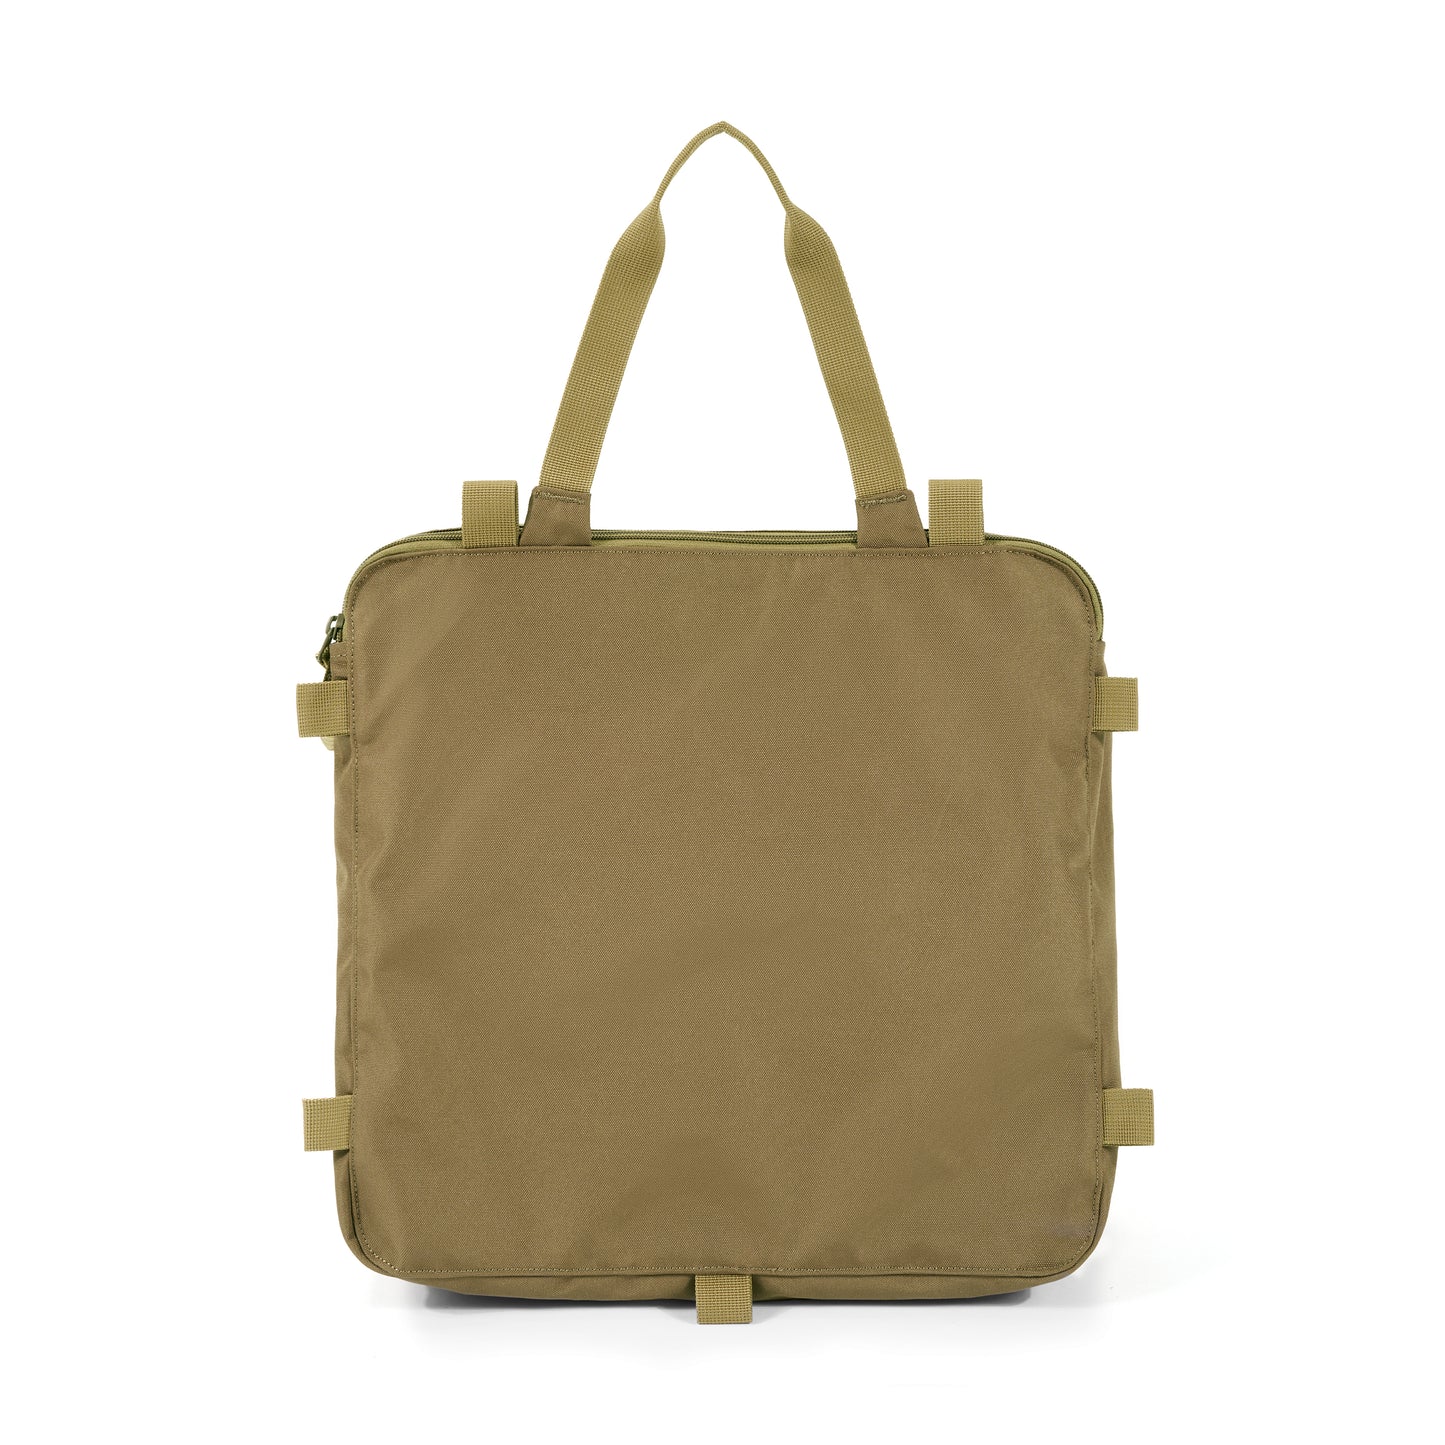 Light Bag for Tac.Field office M - Coyote Tan